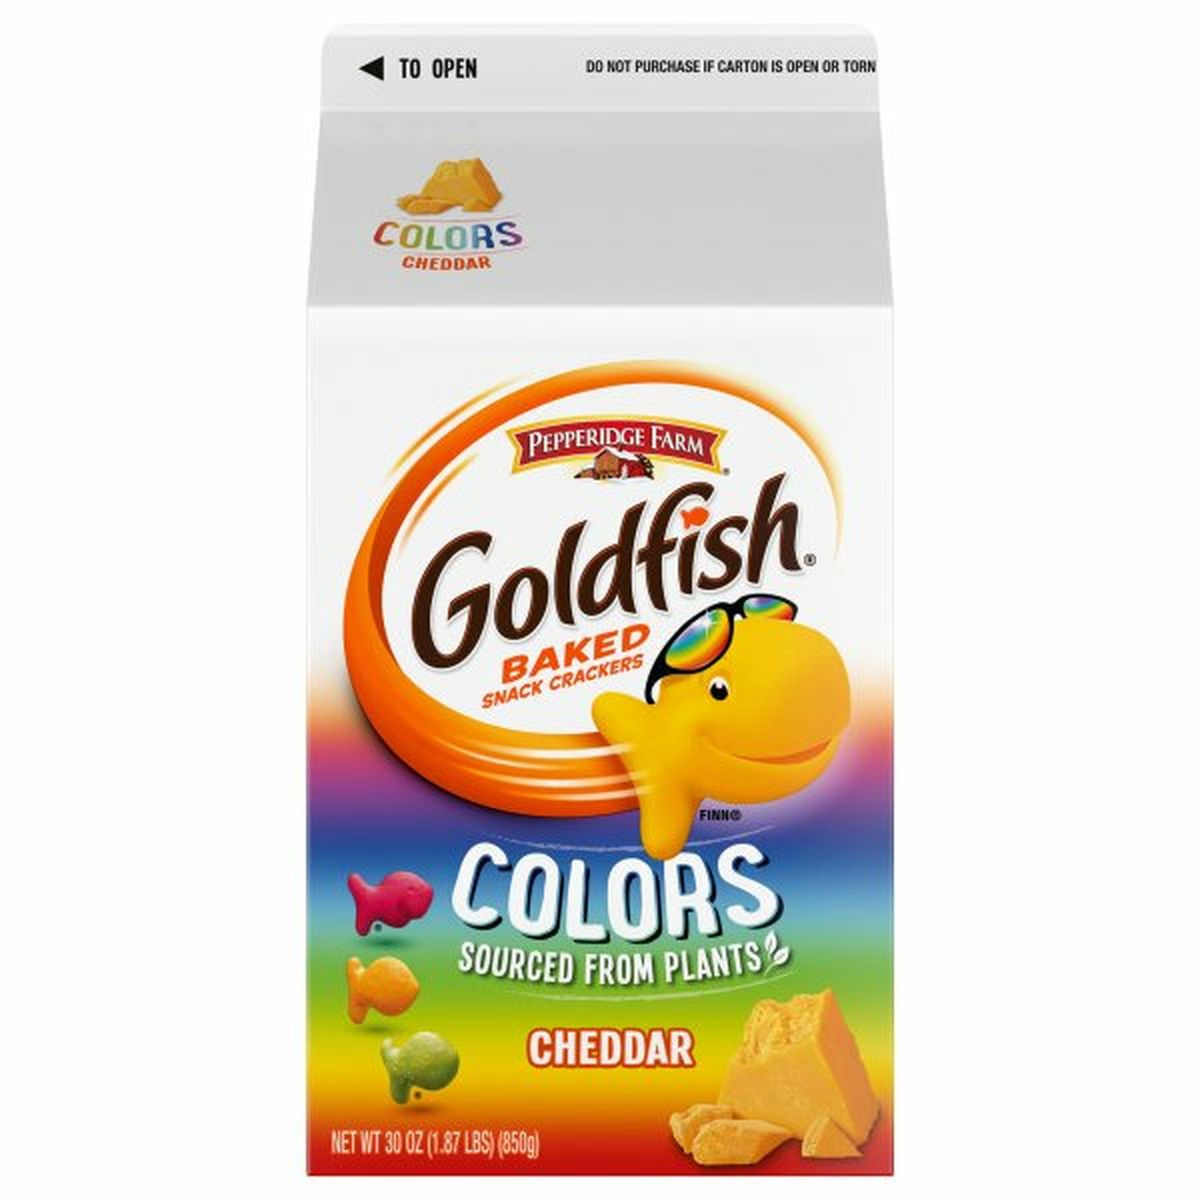 Calories in Pepperidge Farms  Goldfishs Baked Snack Crackers, Cheddar, Colors